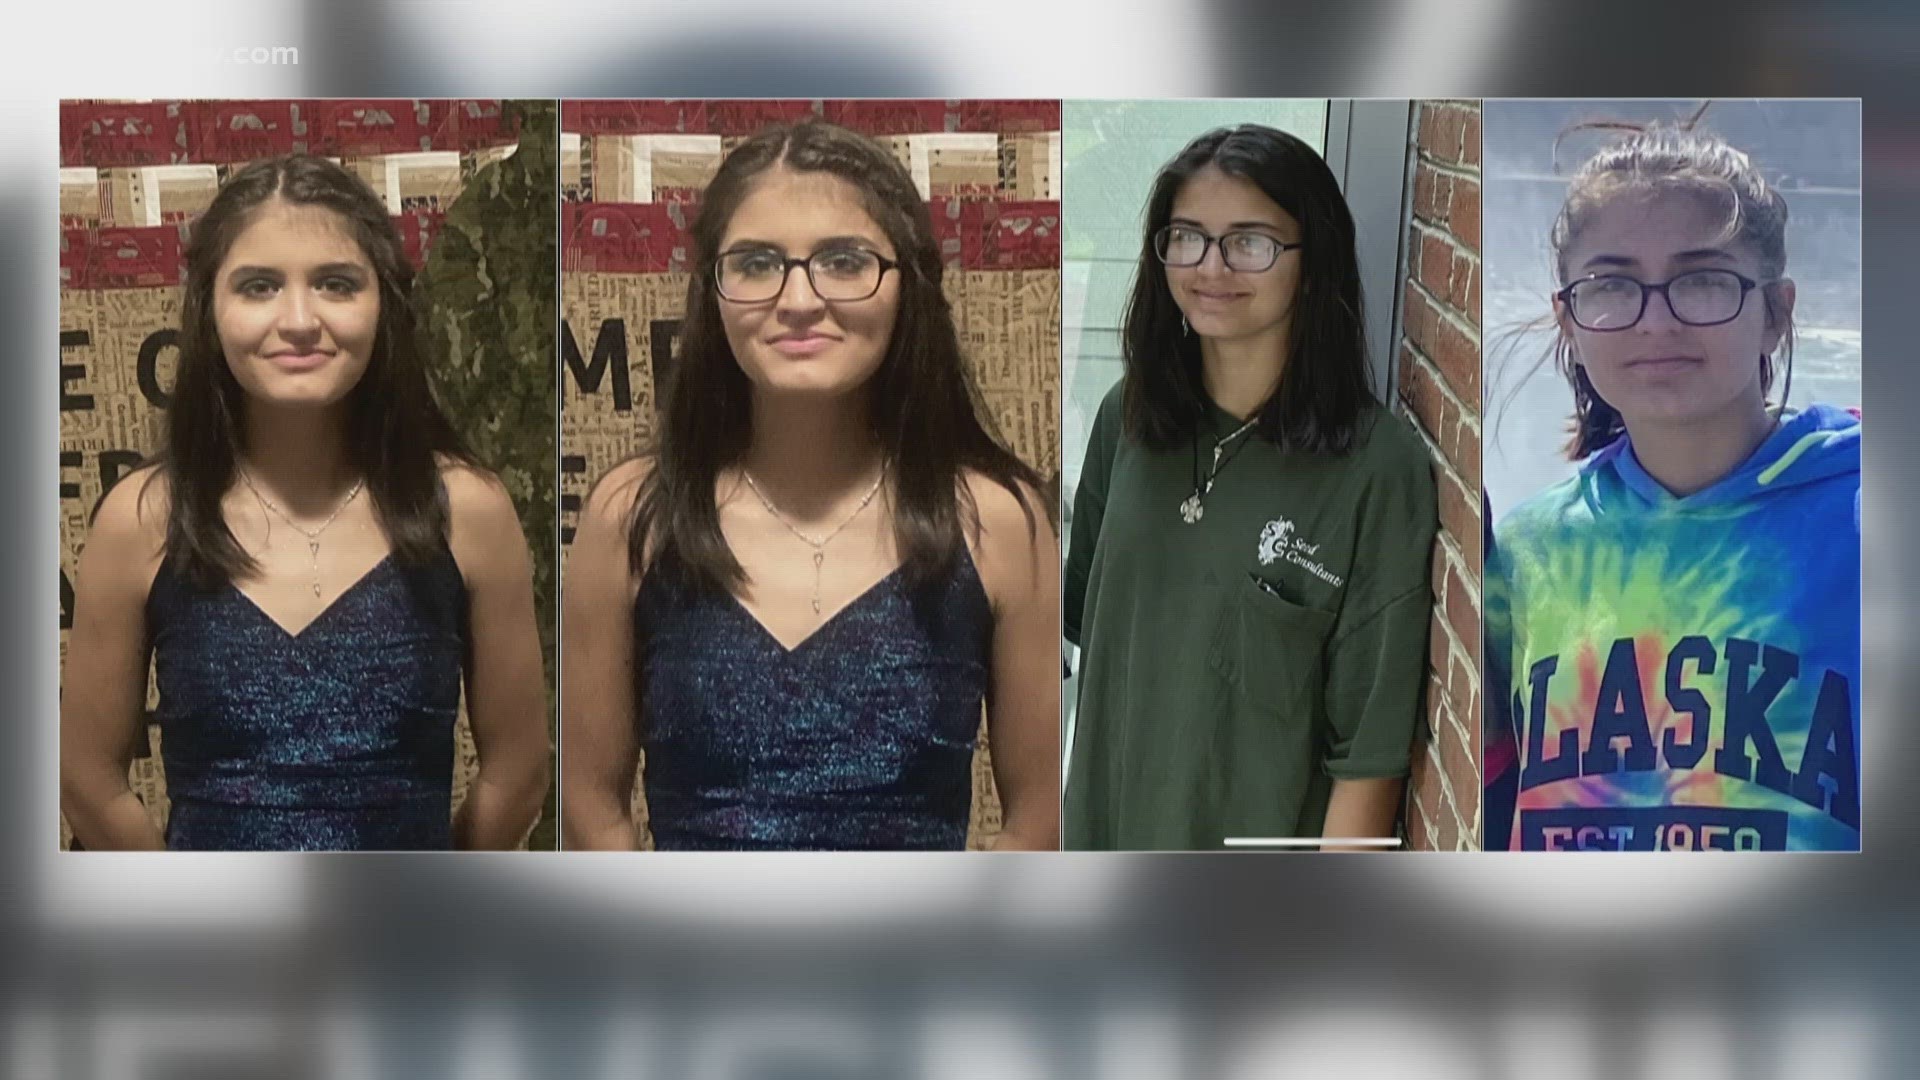 16-year-old Carole Marie Arnold has been found safe, according to a tweet from Army CID.